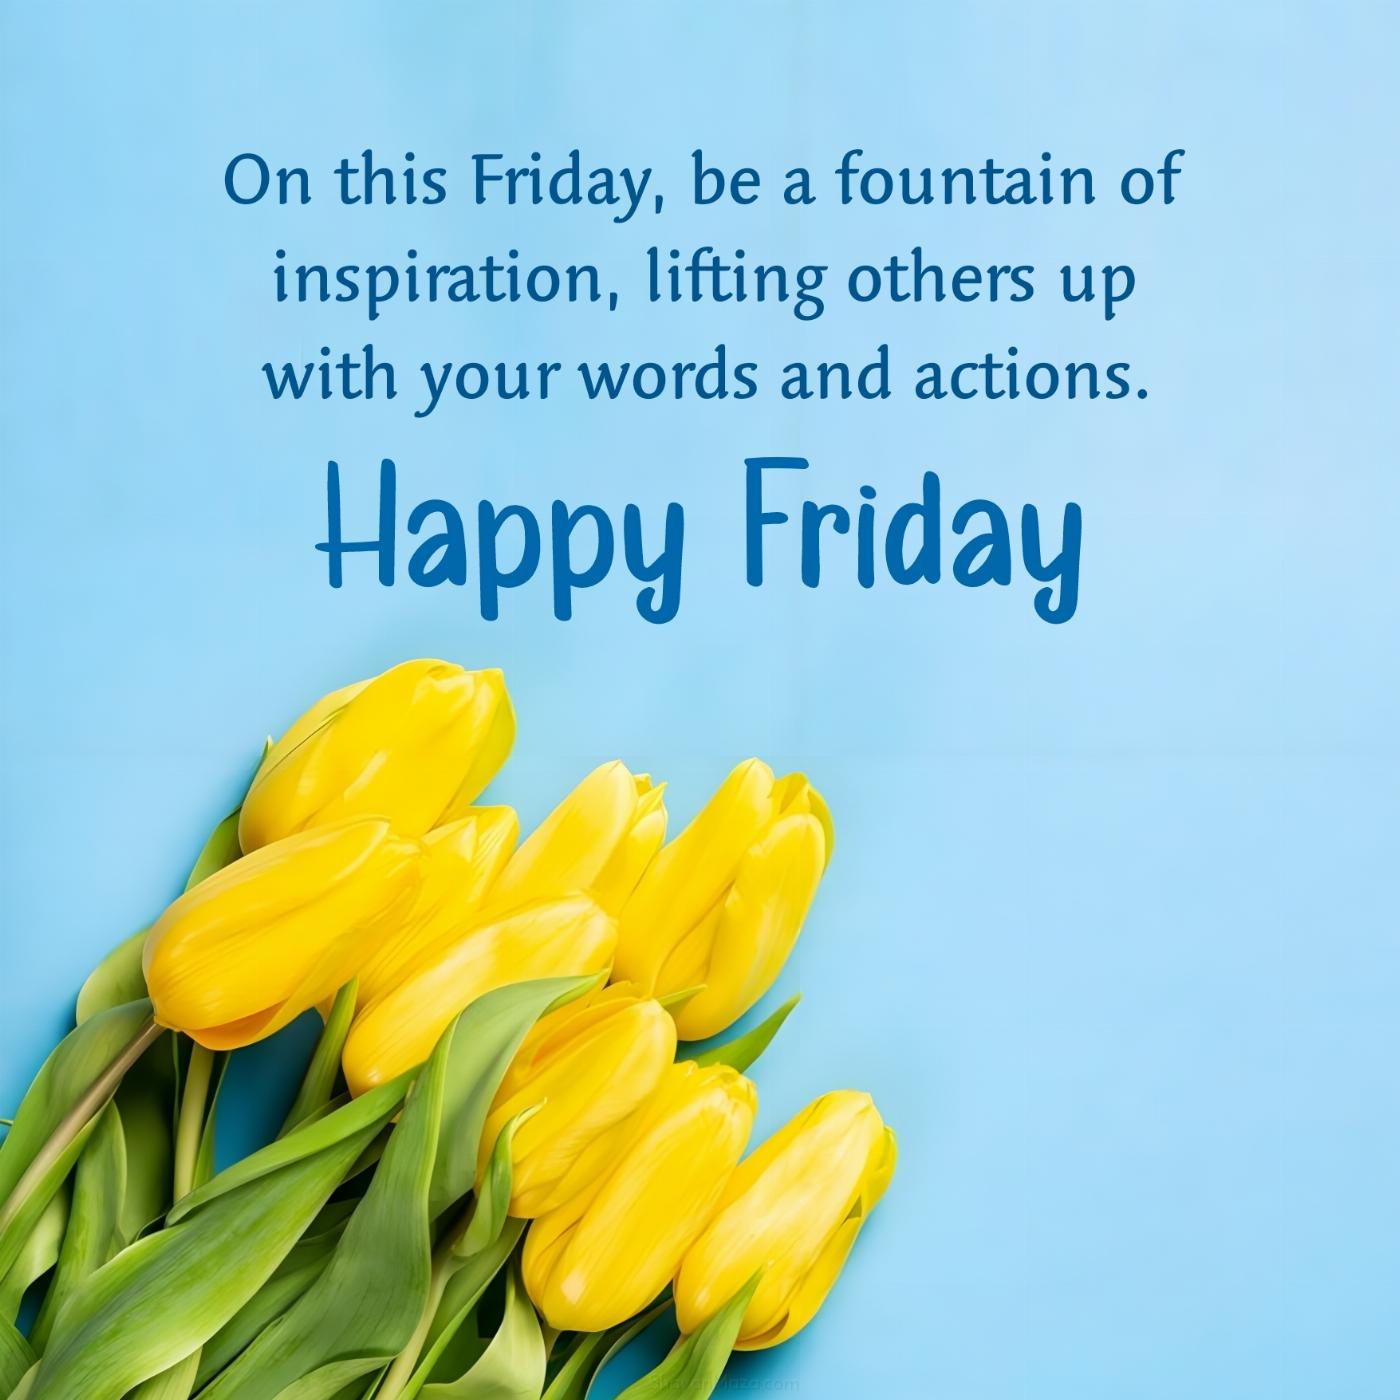 On this Friday be a fountain of inspiration lifting others up